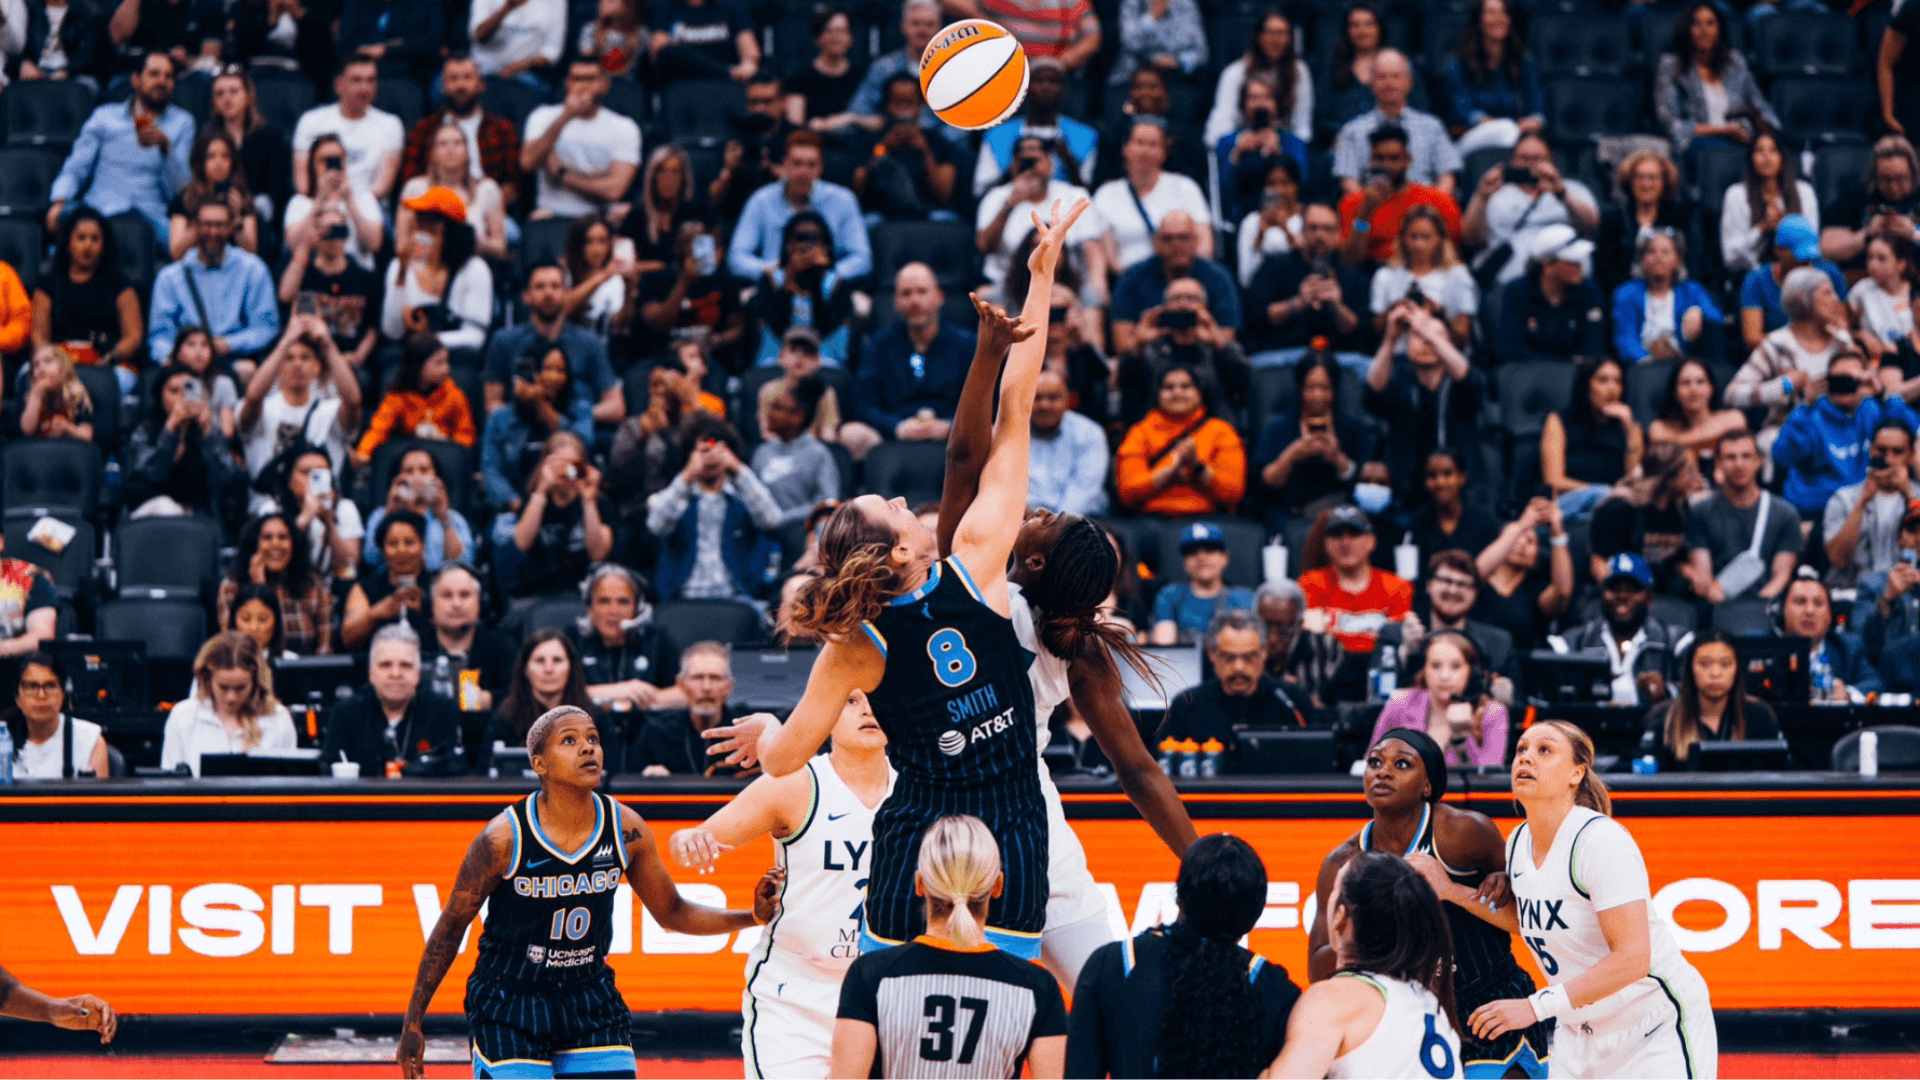 The first-ever WNBA Canada game happened last night and heres how Toronto celebrated